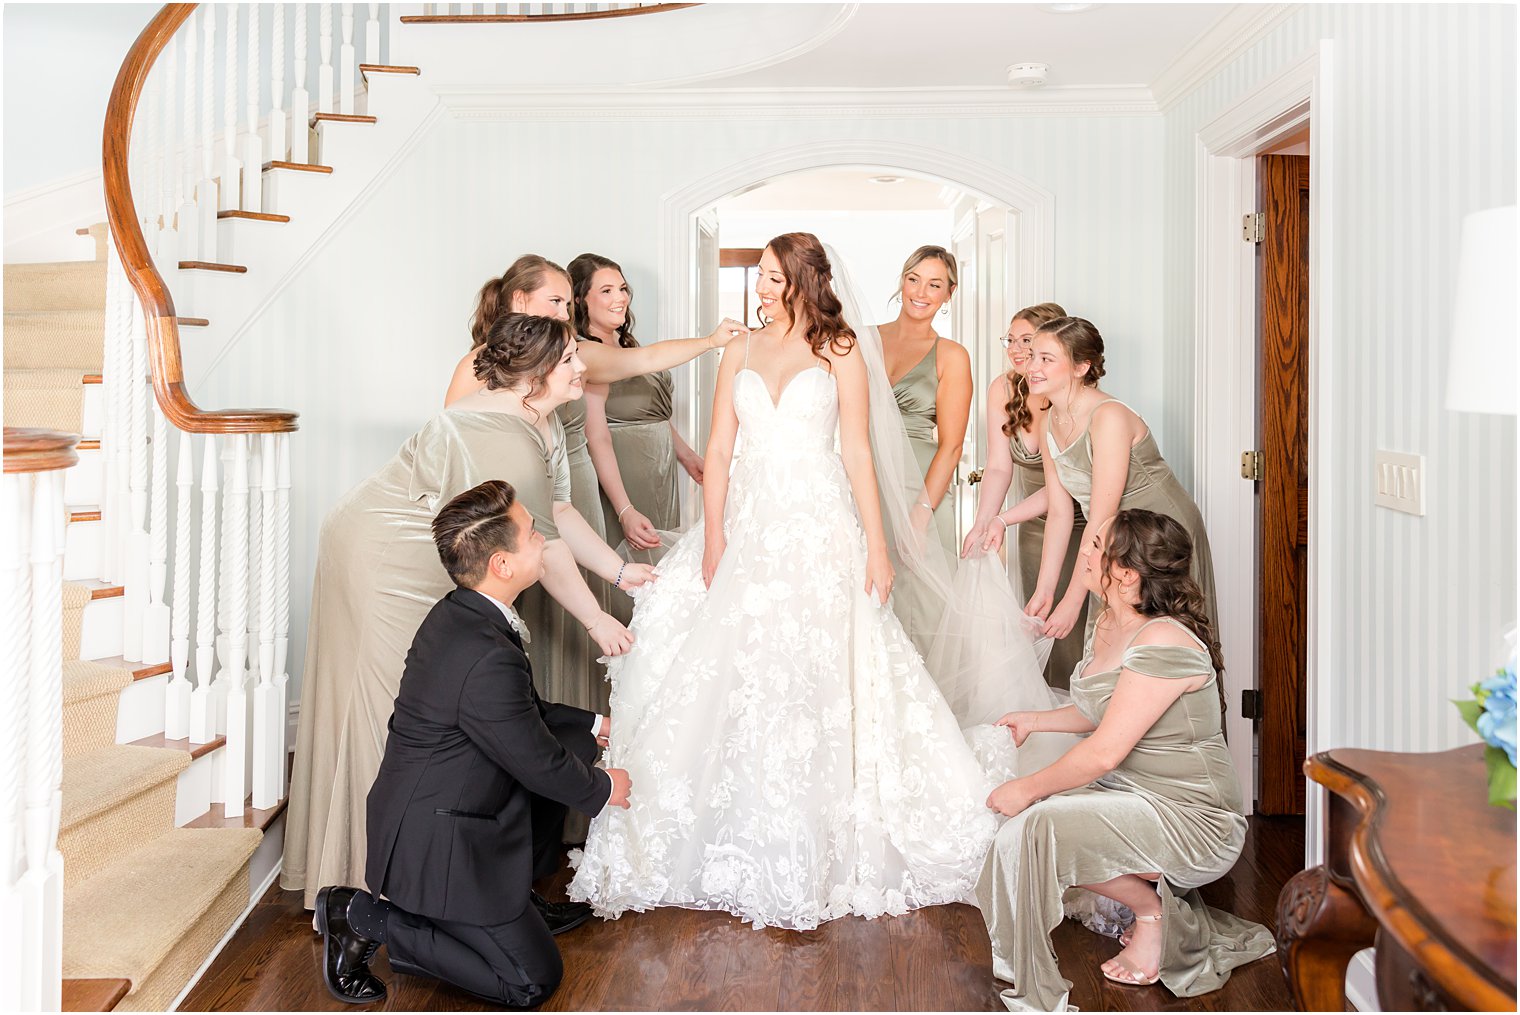 bridal party helps bride with wedding gown inside home 